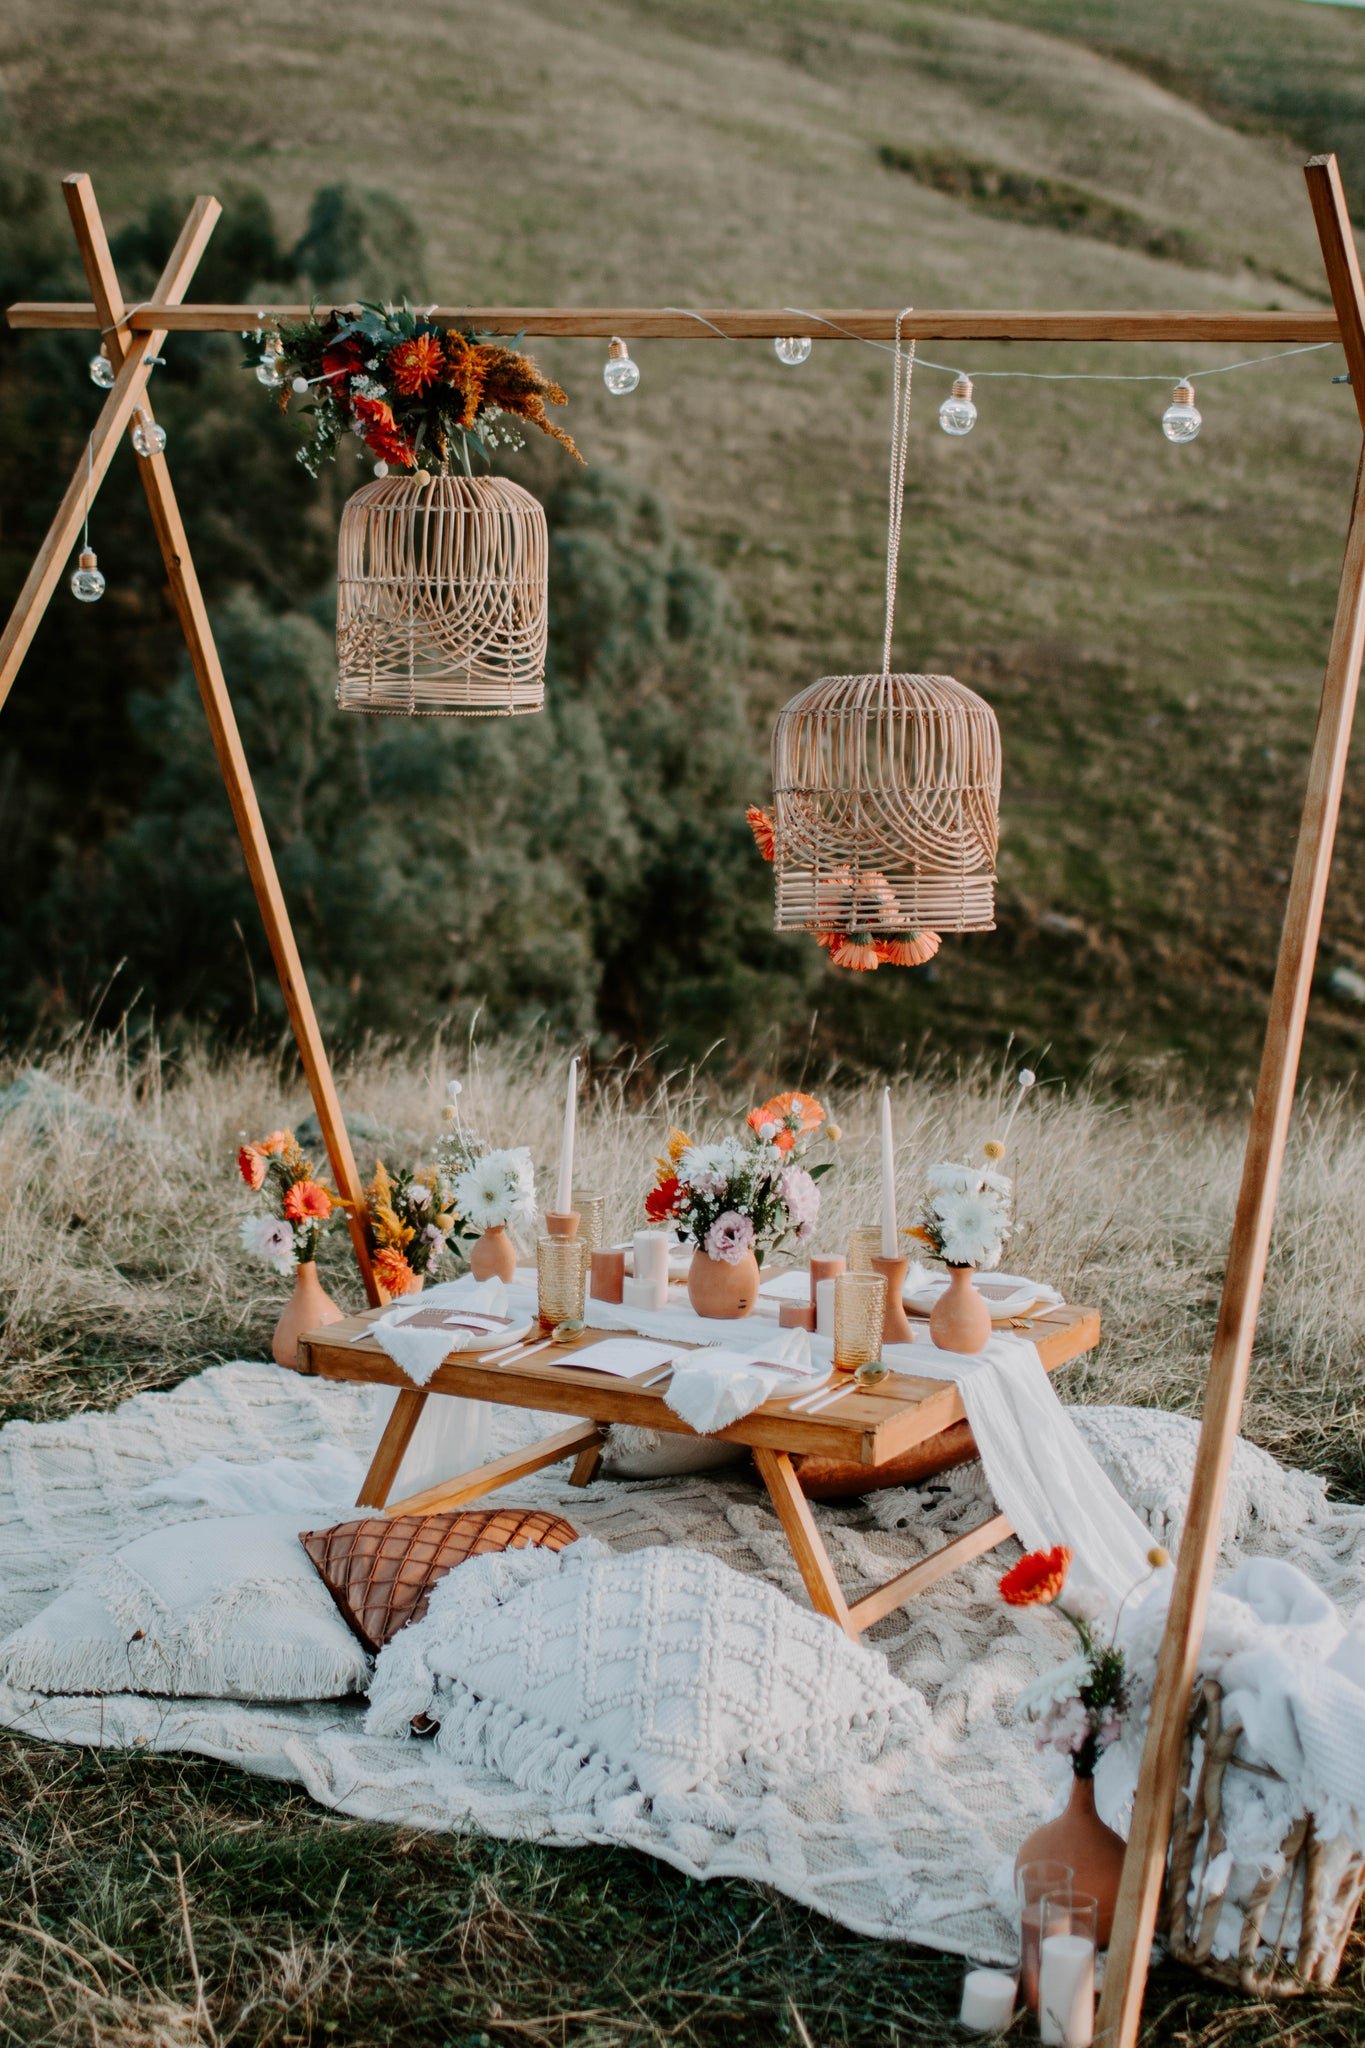    Accessories For The Perfect Picnic, Recipe Ideas For The Perfect Picnic, Picnic Accessories To Make Your Friends Jealous, Picnic Styling Inspiration, Styling Tips For Your Next Picnic, Picnic Inspiration For A Day Date, Picnic Inspiration For A Bi